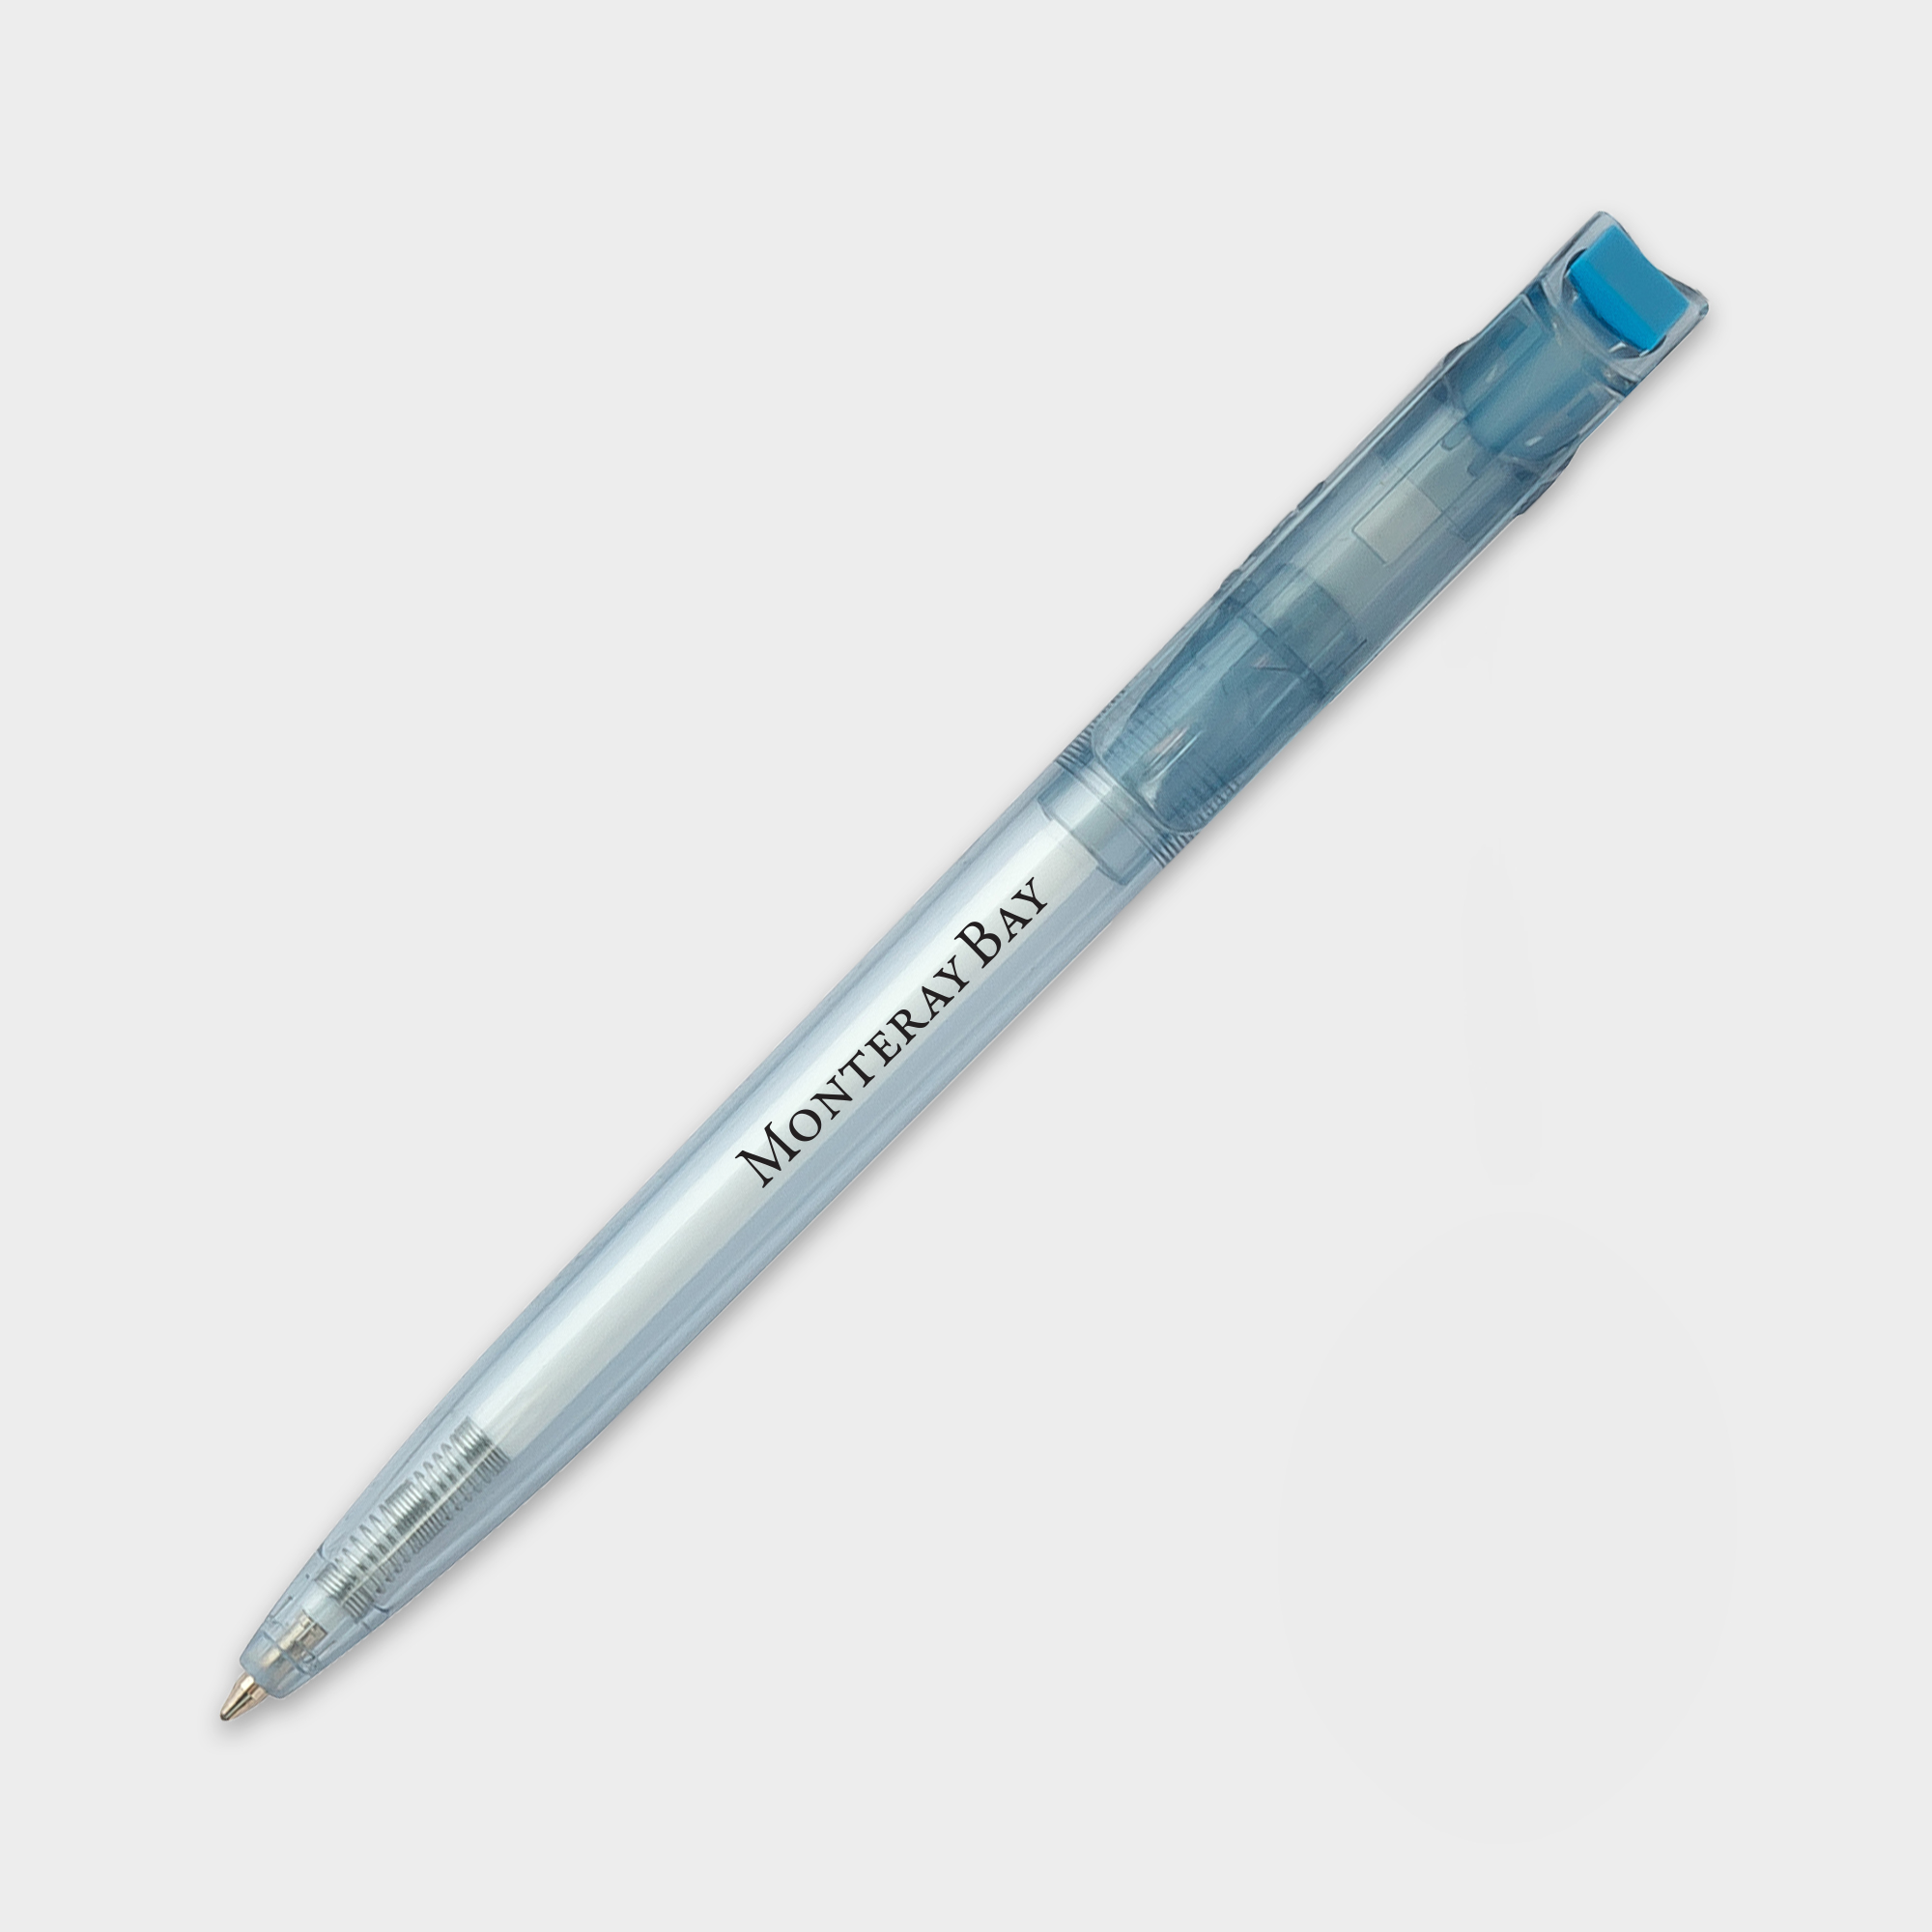 The Green & Good Litani Pen. An eco-friendly and high-quality pen made from recycled plastic bottles (rPET) with black ink refills and a light blue body with coloured tip. Made in the EU and available with a variety of different tip colours. Light Blue